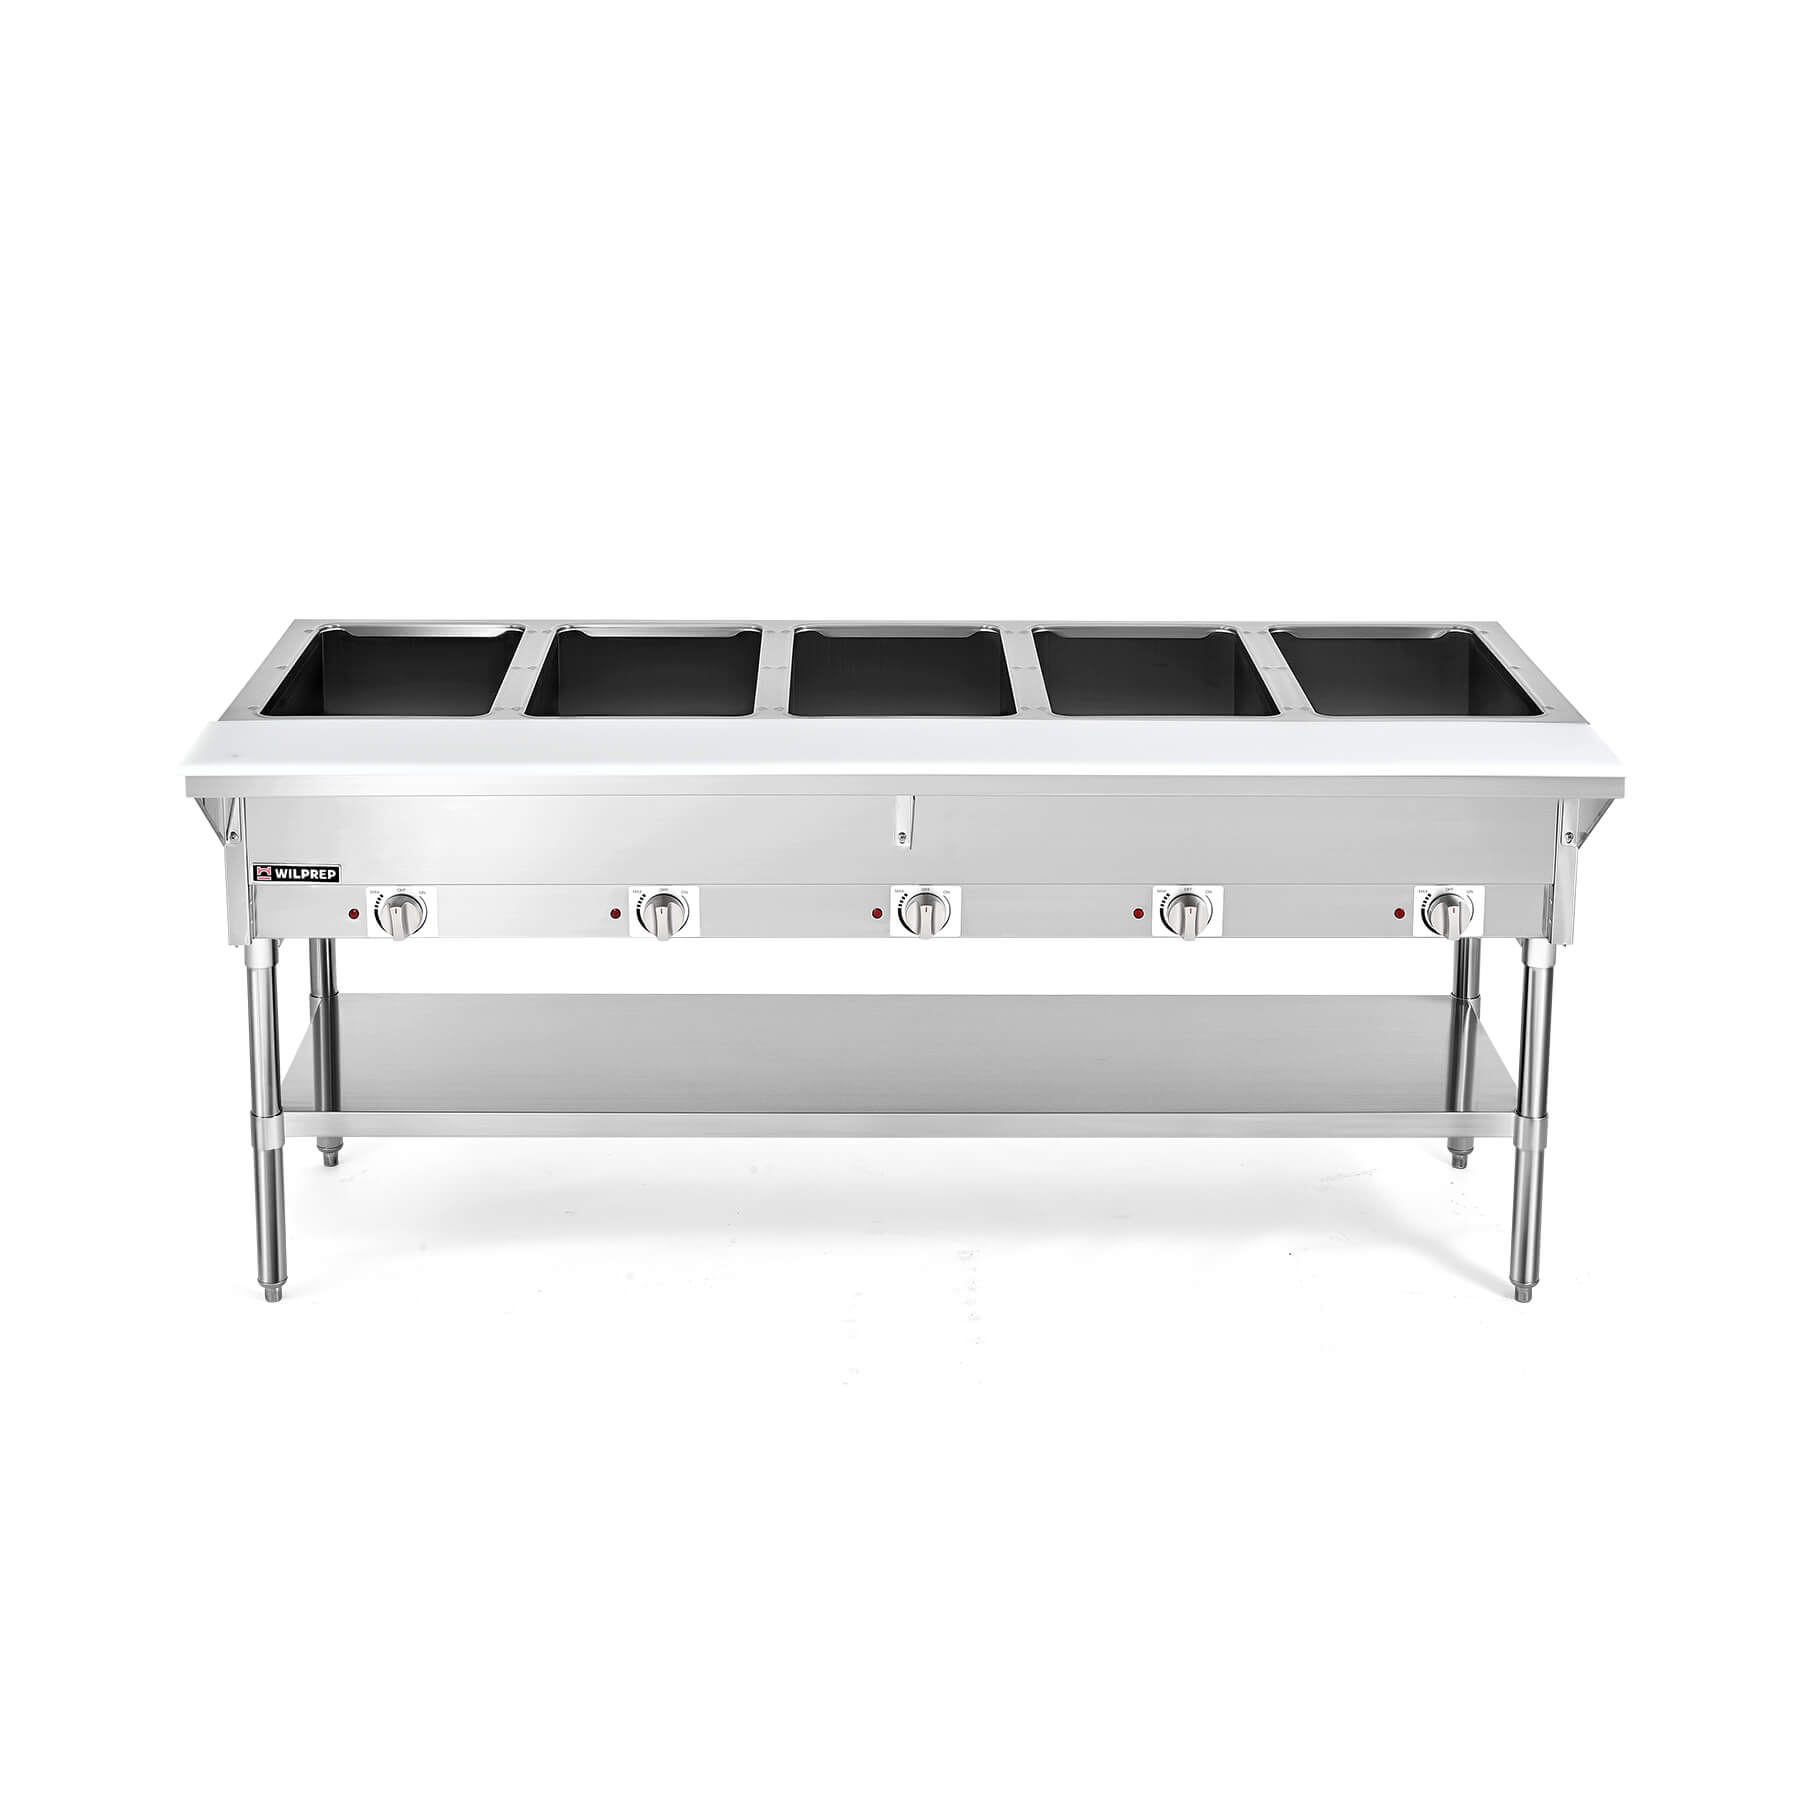 5 Well Electric Steam Table with Storage Shelf 1000W